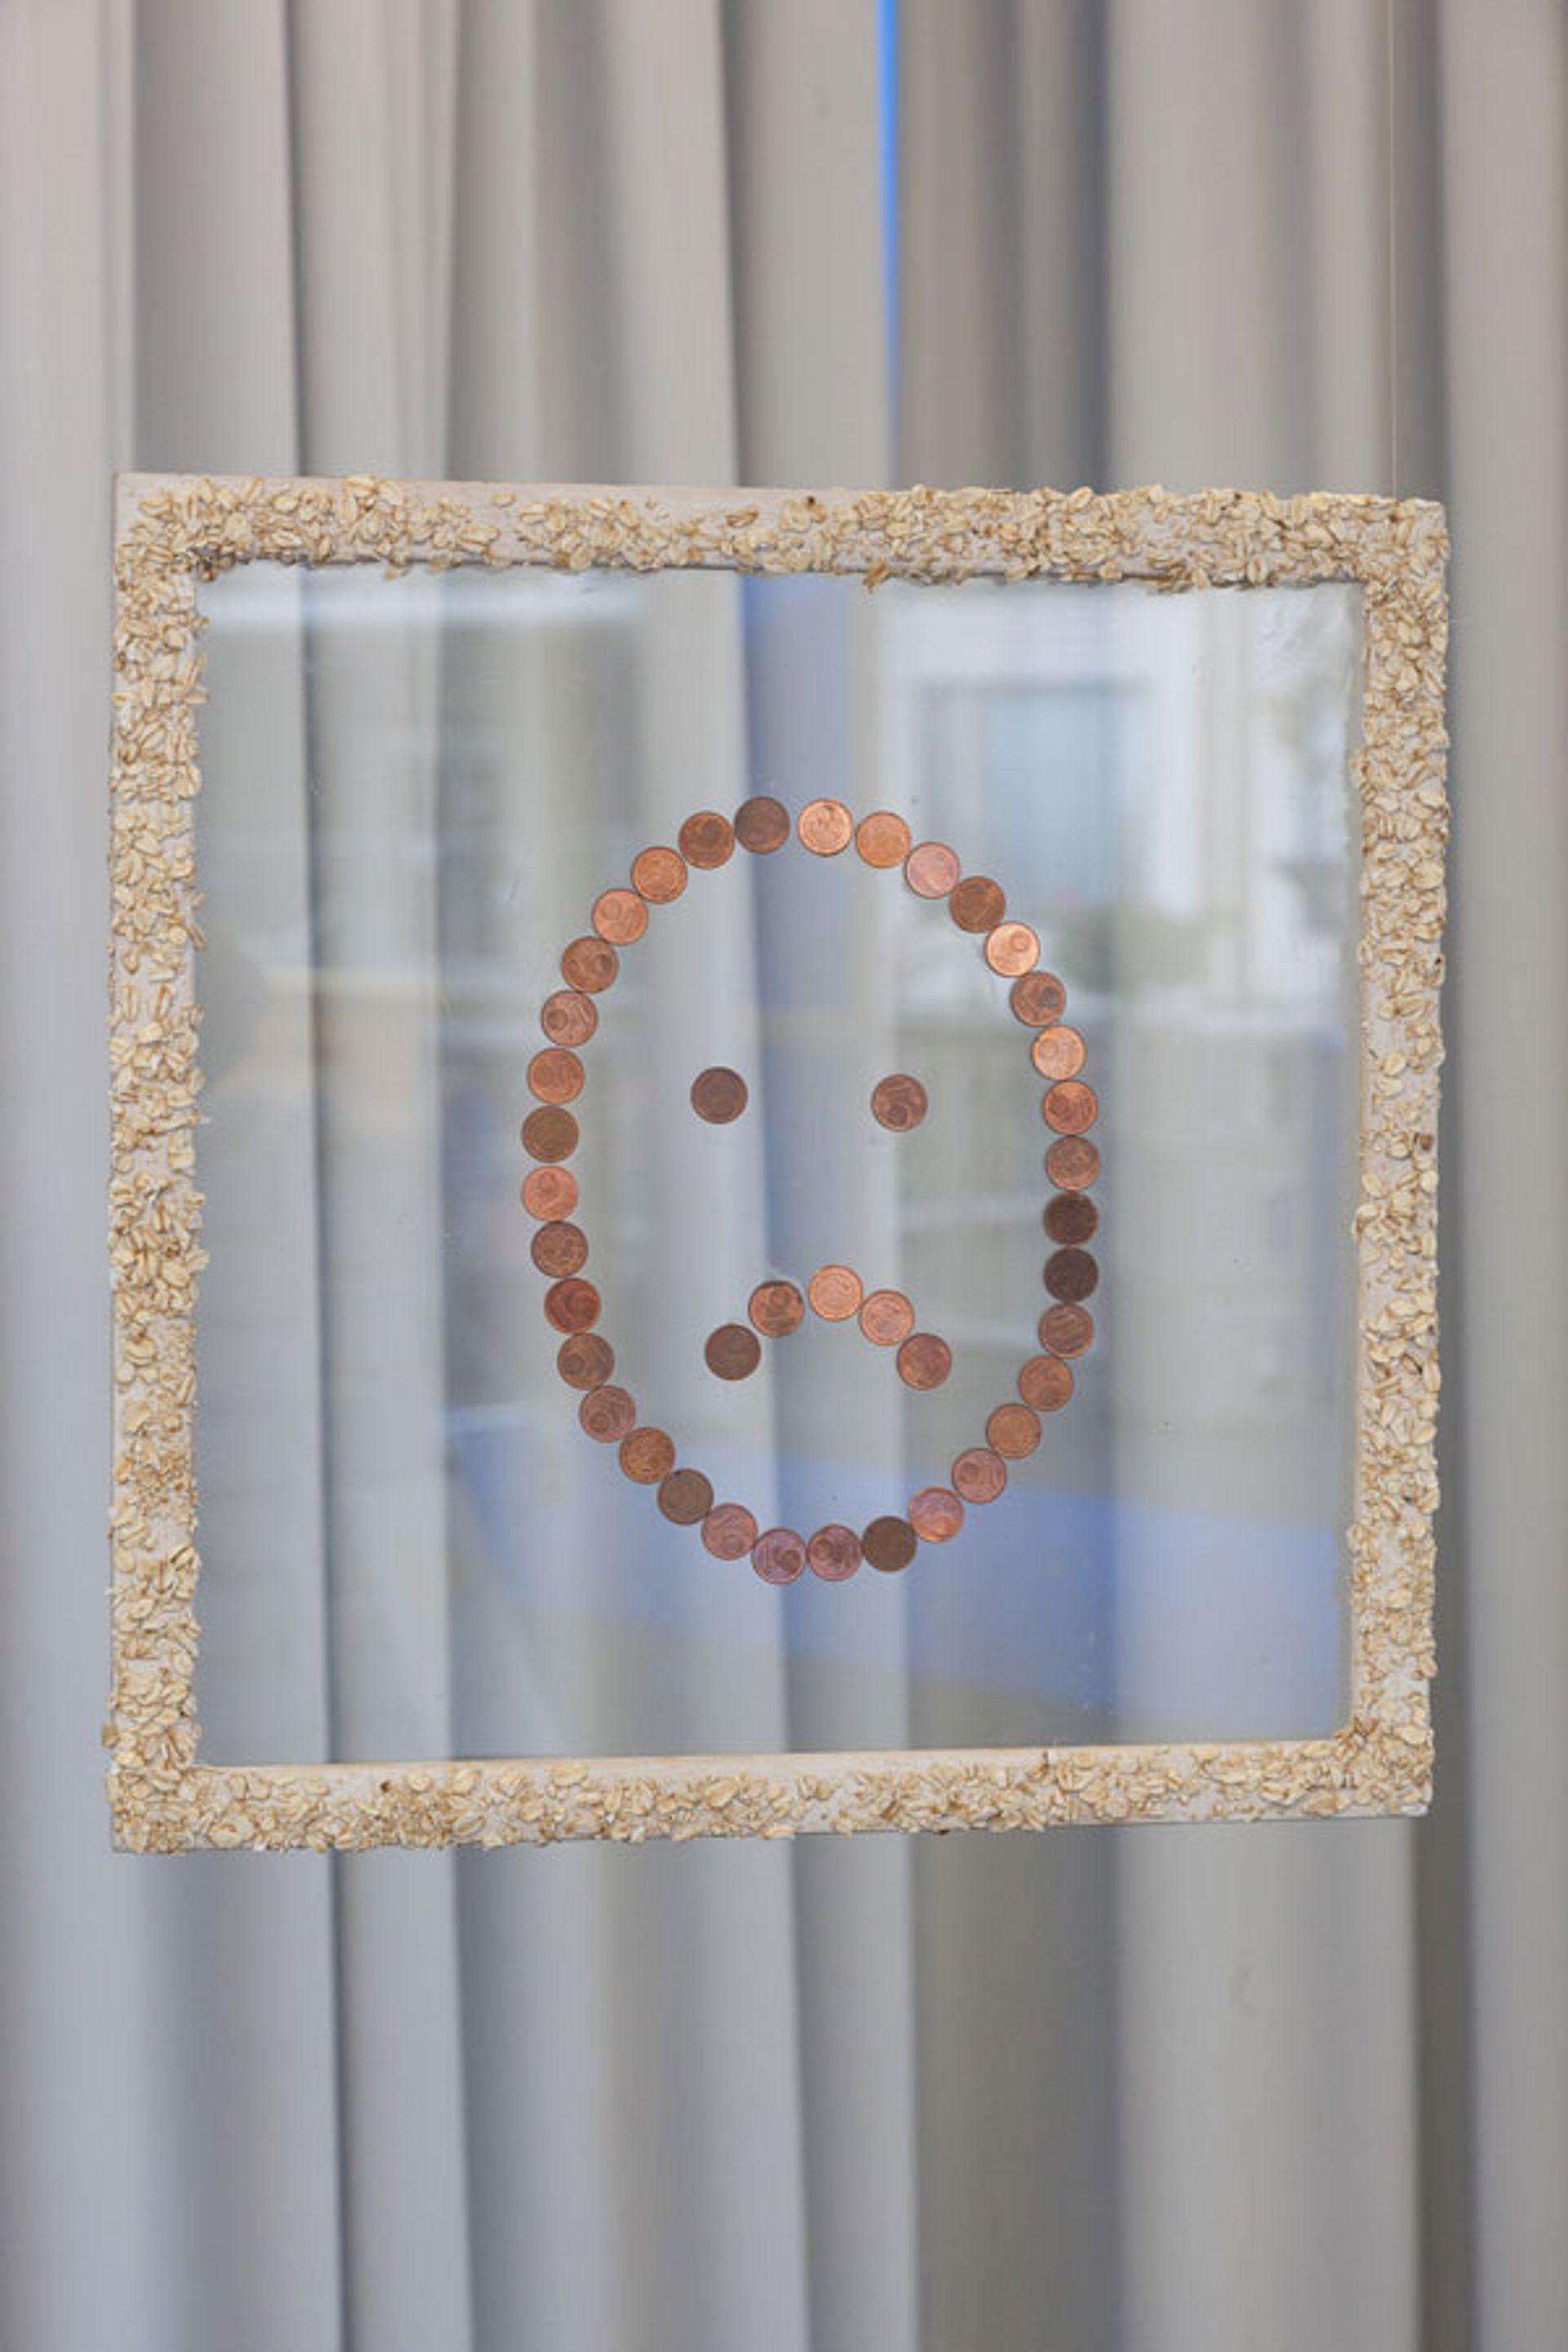 UNHAPPY OATS, oatmeal on wood, glass and cent pieces, 2013